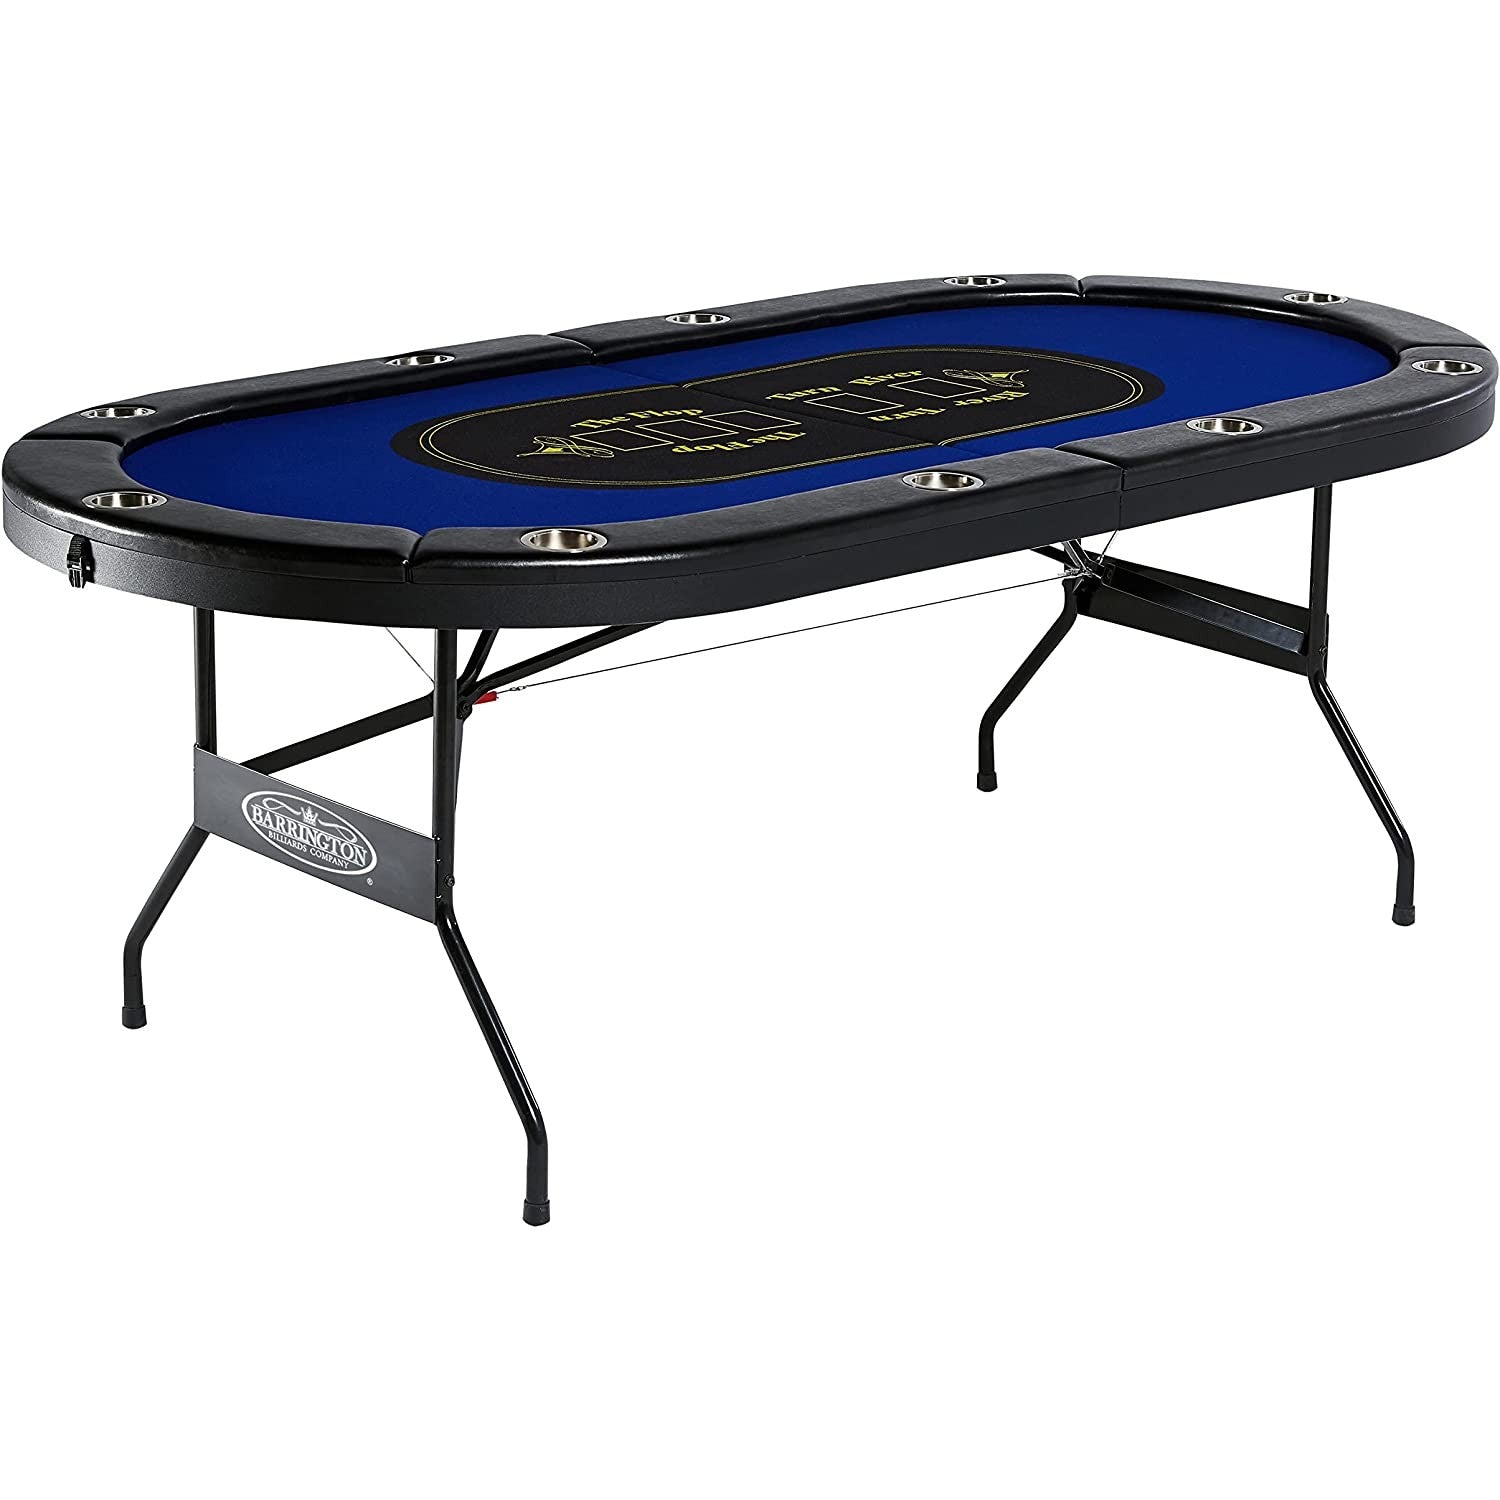 A ten person fold up poker table colored black with blue felt.